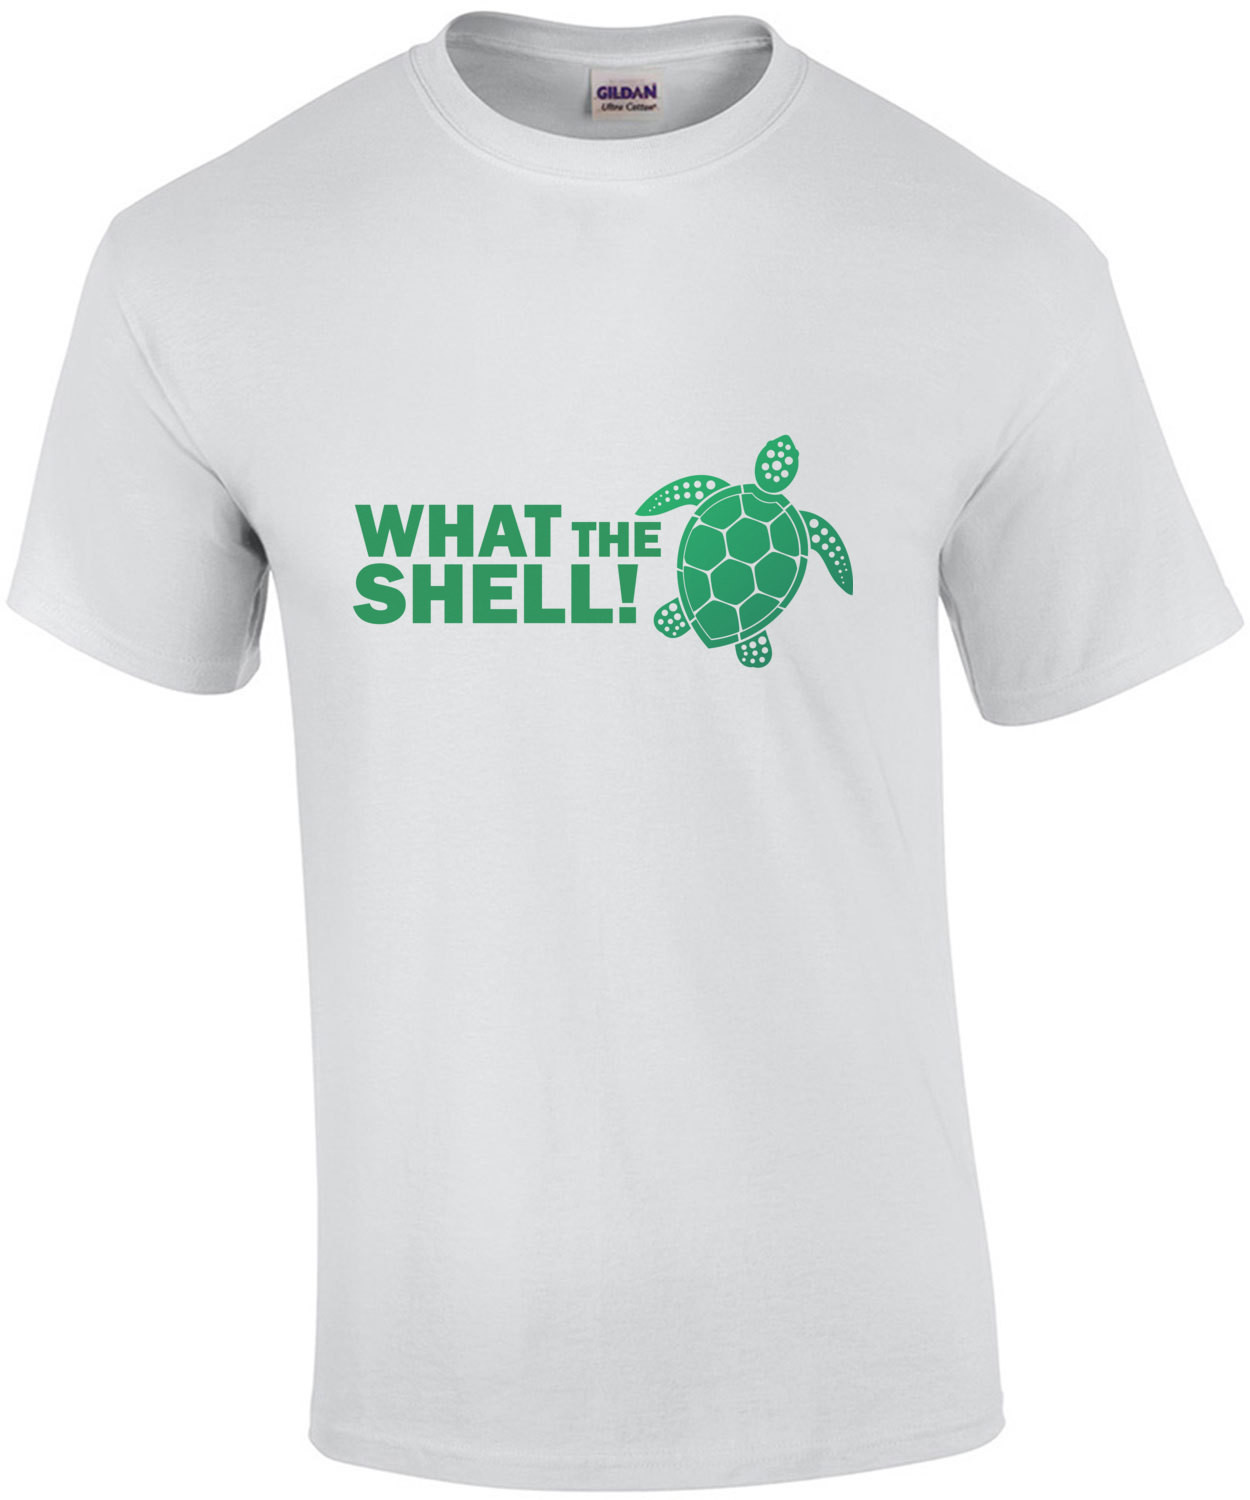 What the shell - funny turtle t-shirt